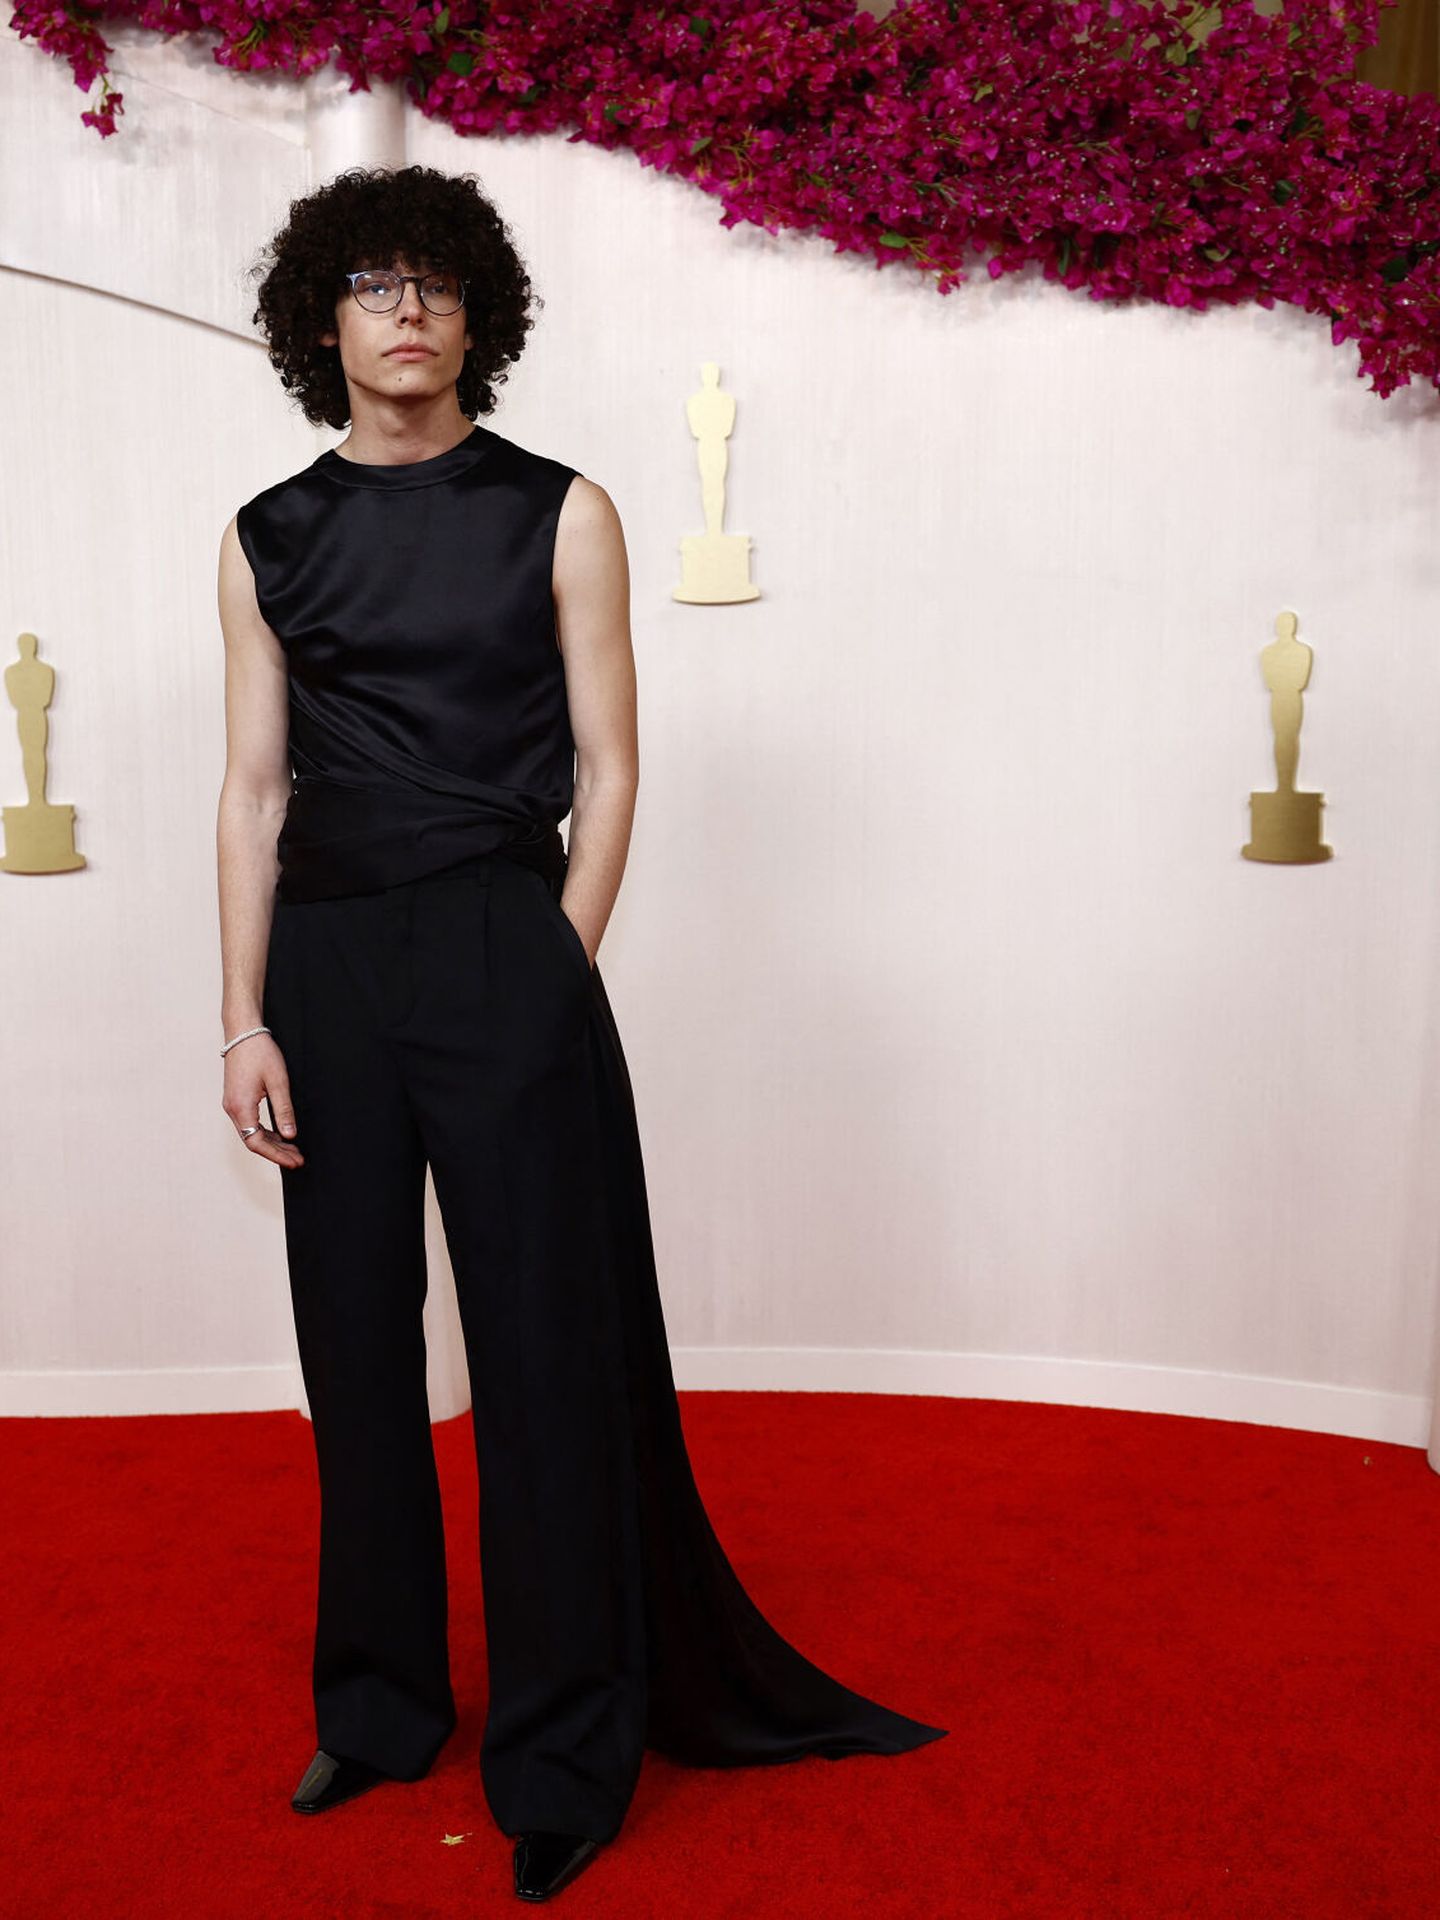 Reece Feldman poses on the red carpet during the Oscars arrivals at the 96th Academy Awards in Hollywood, Los Angeles, California, U.S., March 10, 2024. REUTERS Sarah Meyssonnier